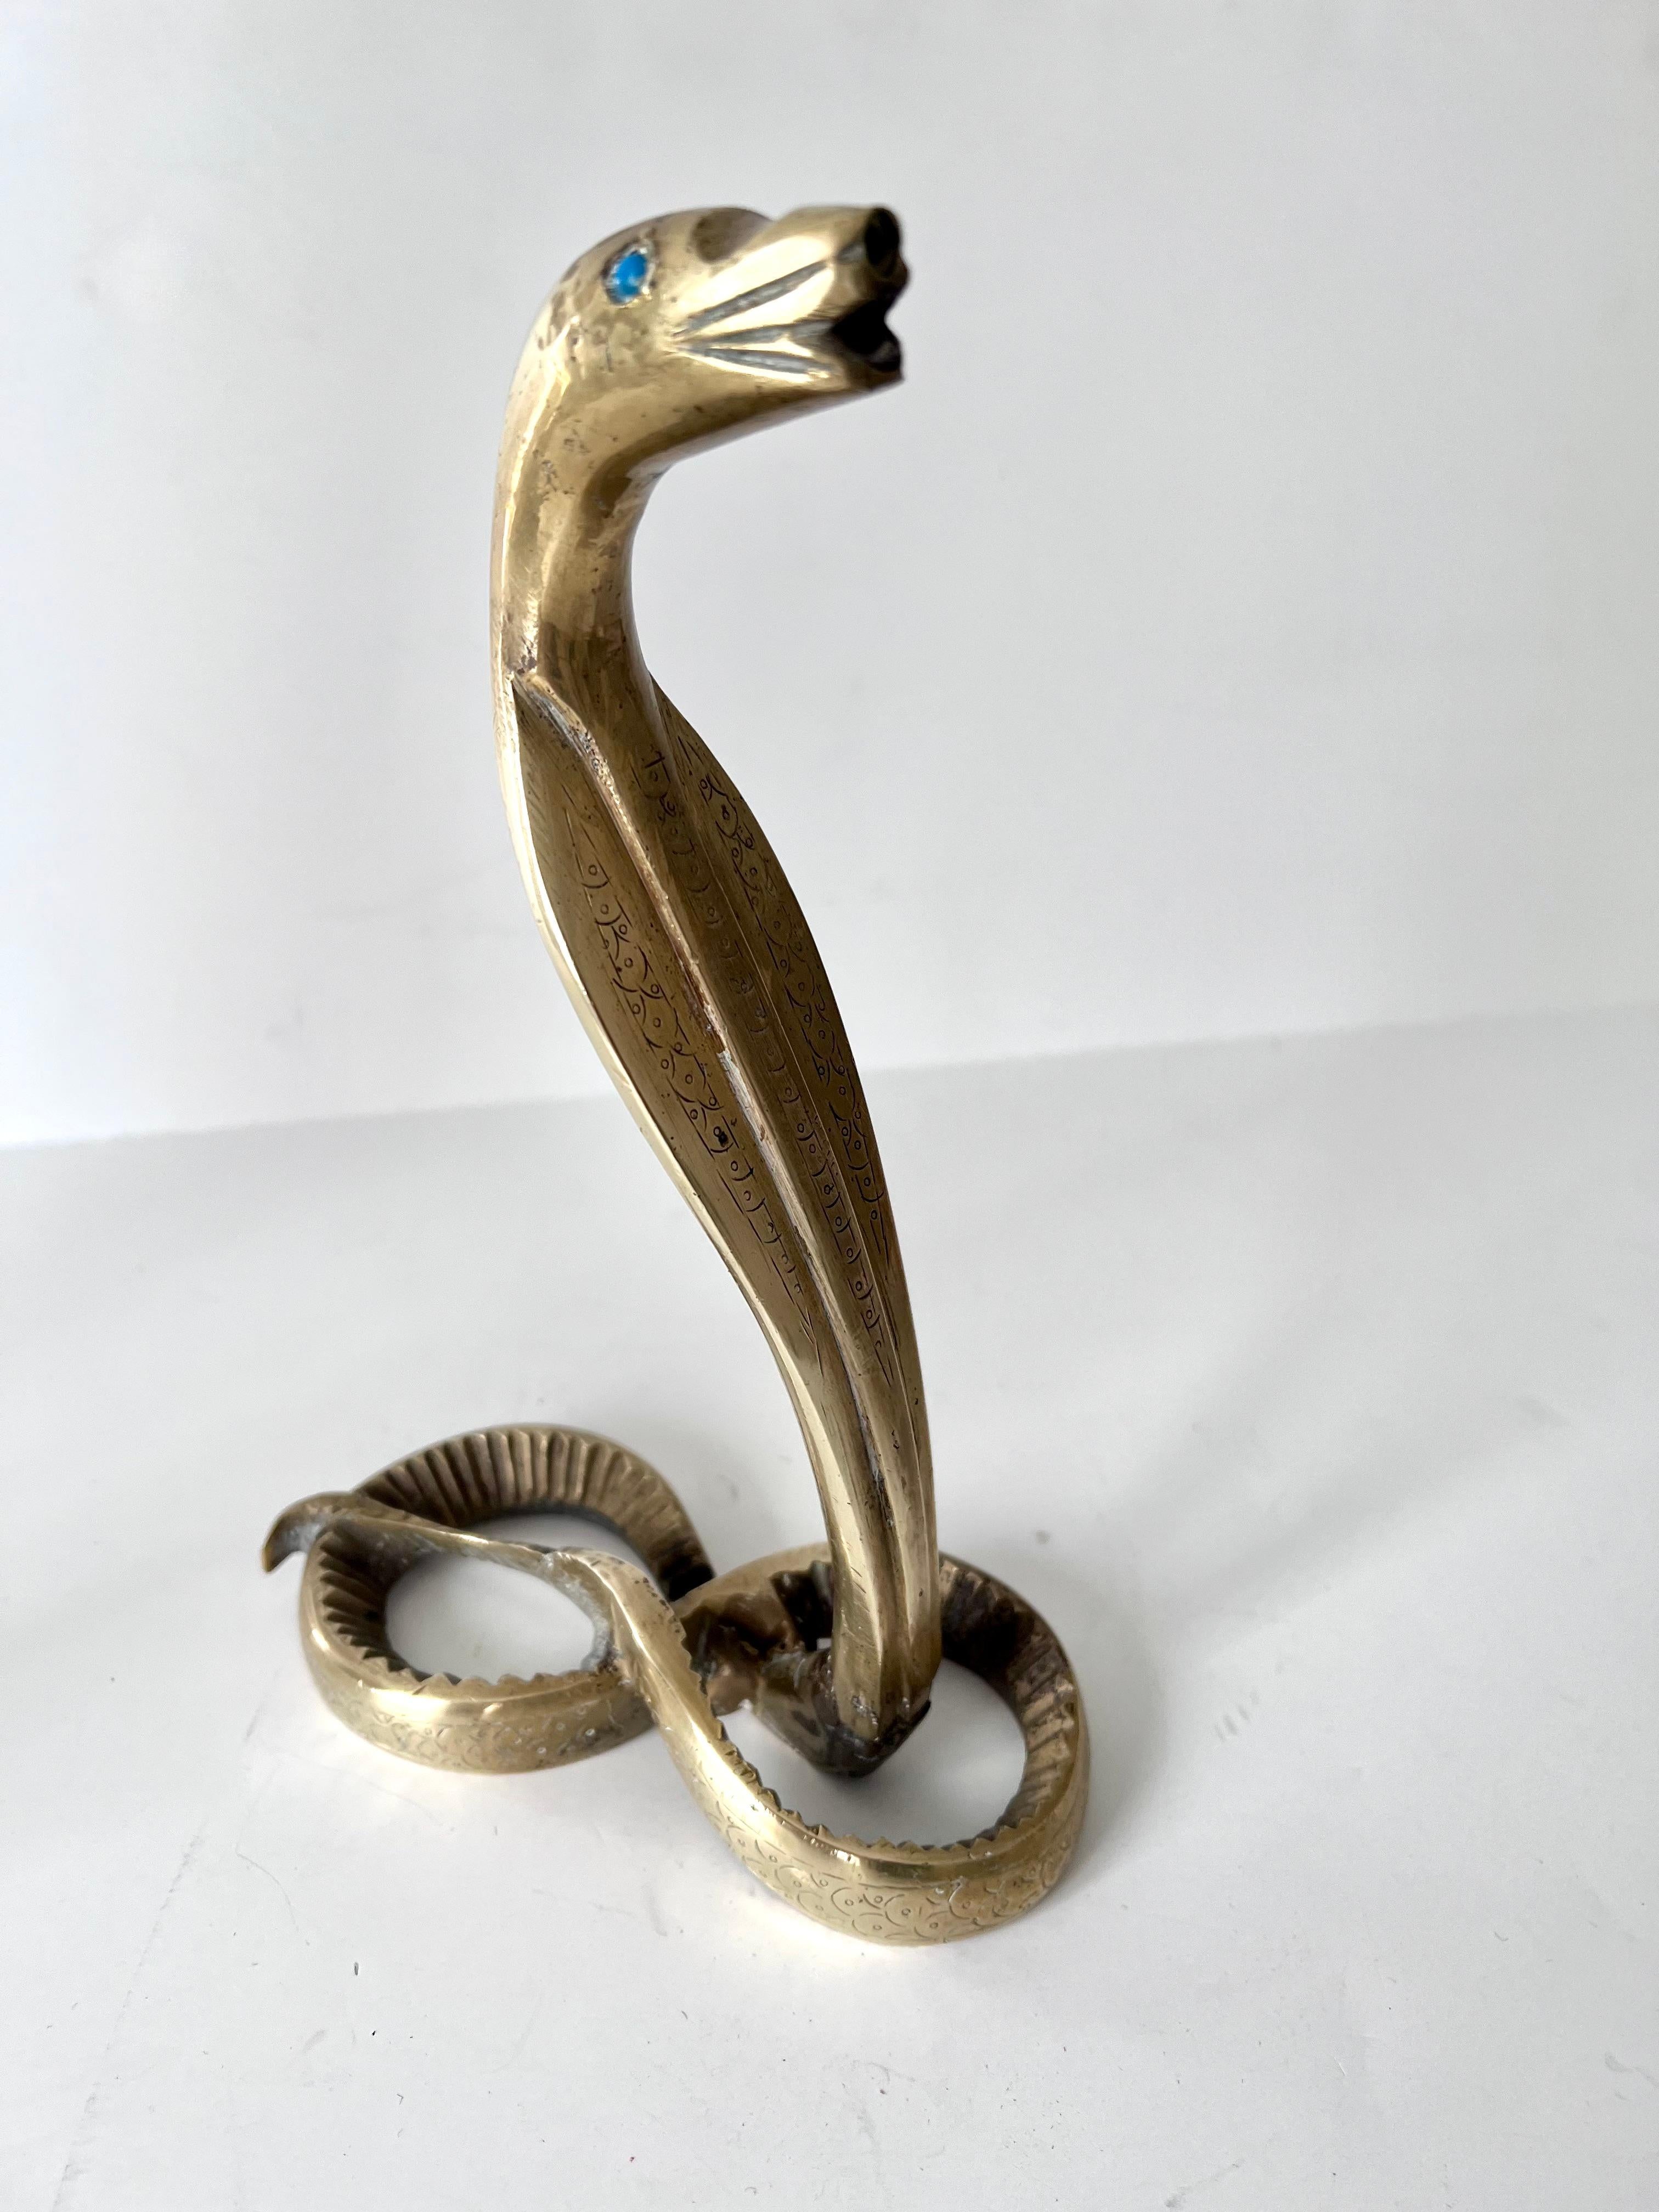 Acquired in Paris France, this serpent is a nice solid brass piece with turquoise or stone eyes.. whenever we have a snake they go fast, and this one should be no exception... a great piece, ready for any shelf as a sculpture or at a desk or work